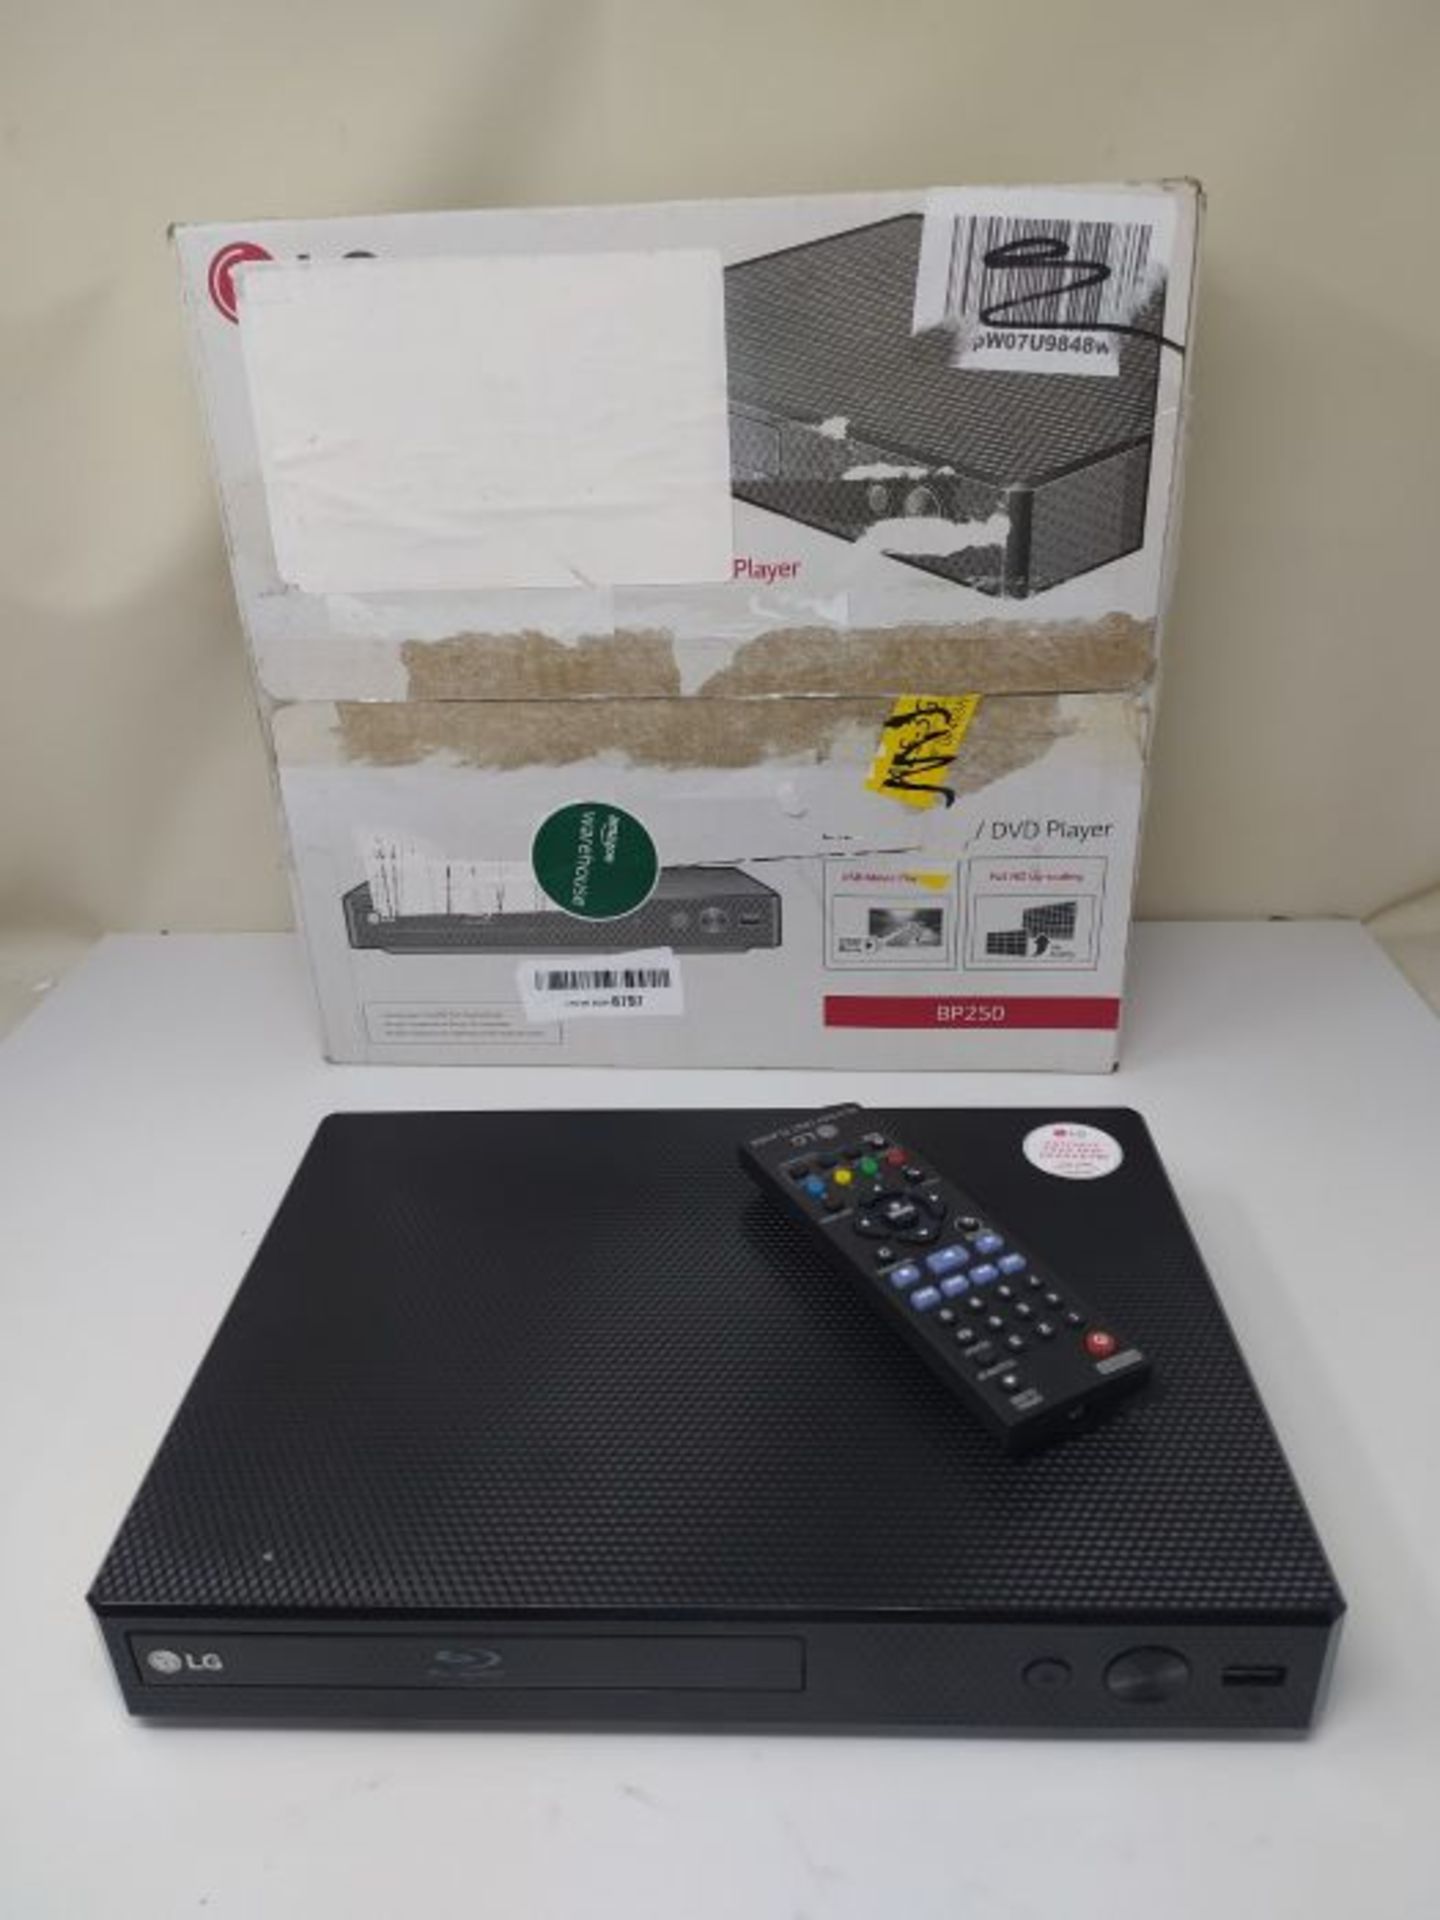 RRP £50.00 LG BP250 DGBRLLK Blu-Ray and DVD Disc Player with Full HD Up-scaling and external HDD - Image 2 of 4